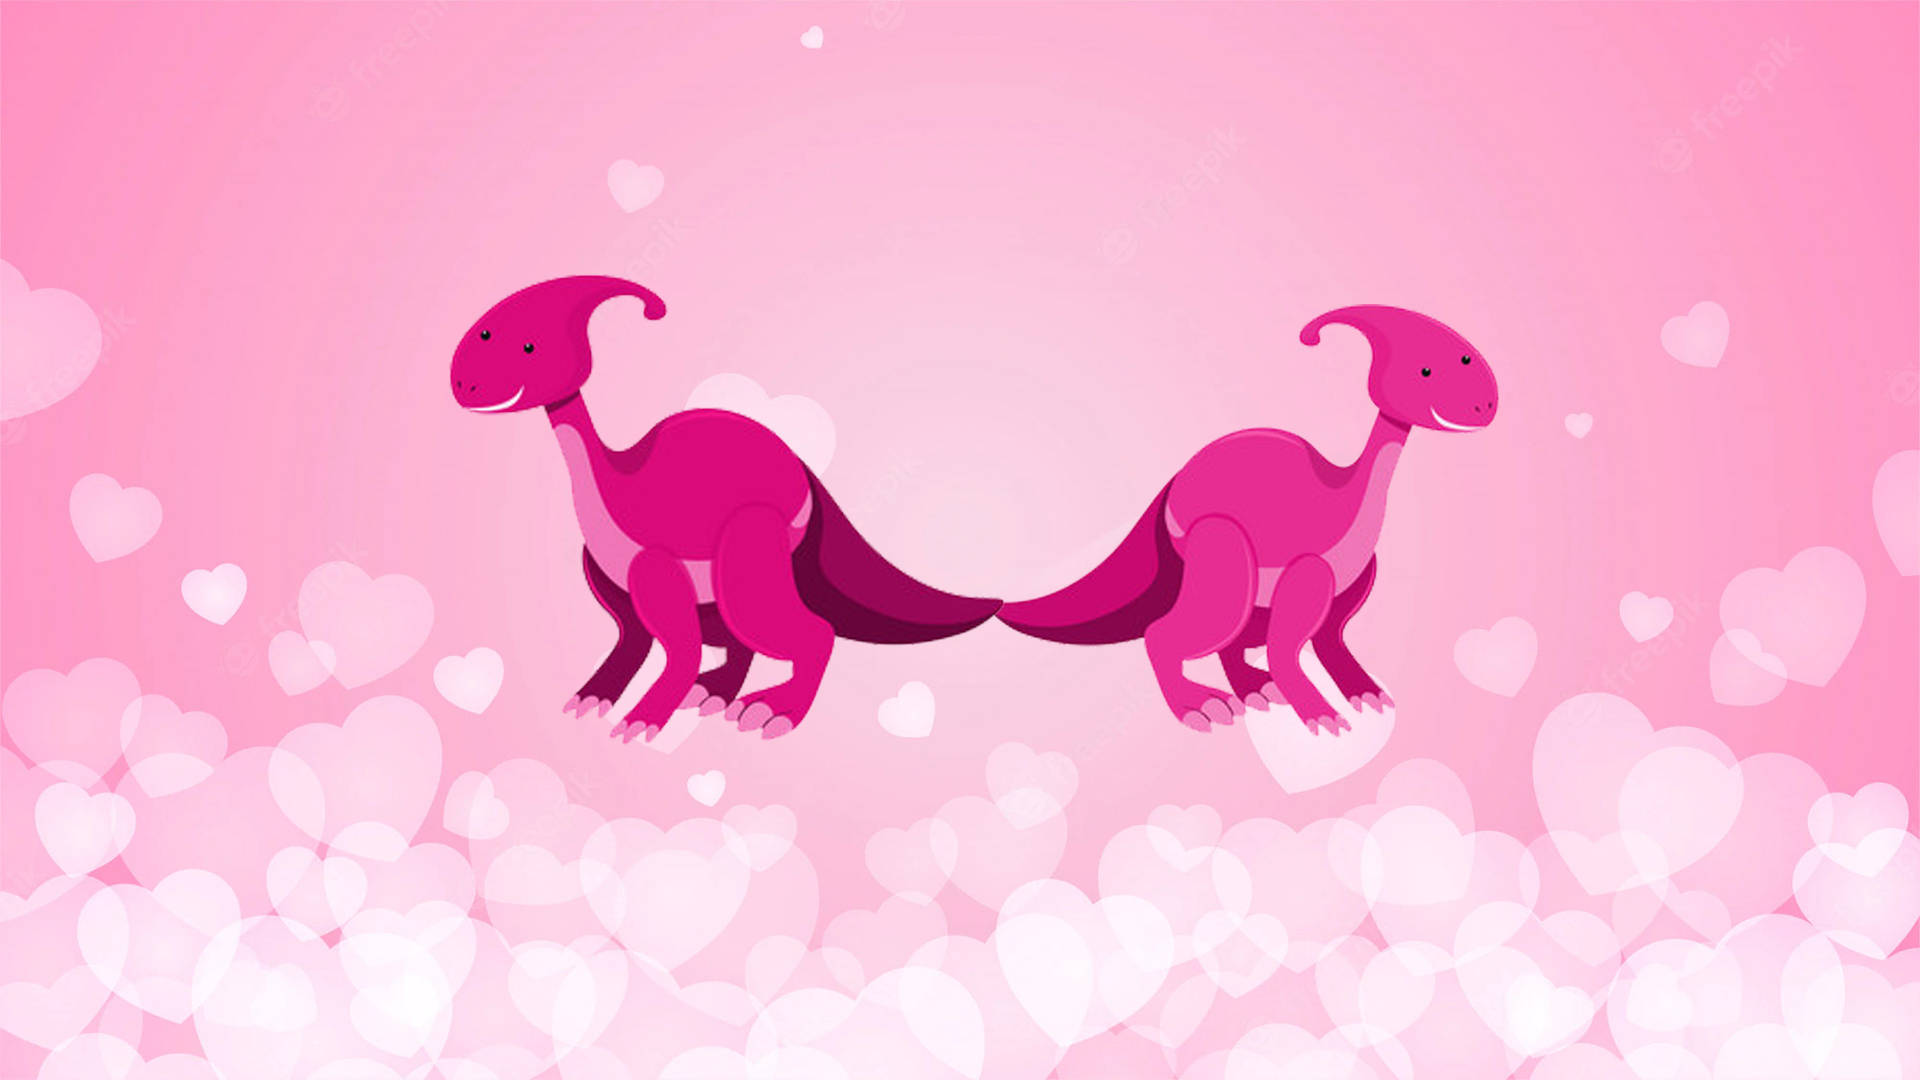 Cute Pink Dinosaur Back-to-back Hearts